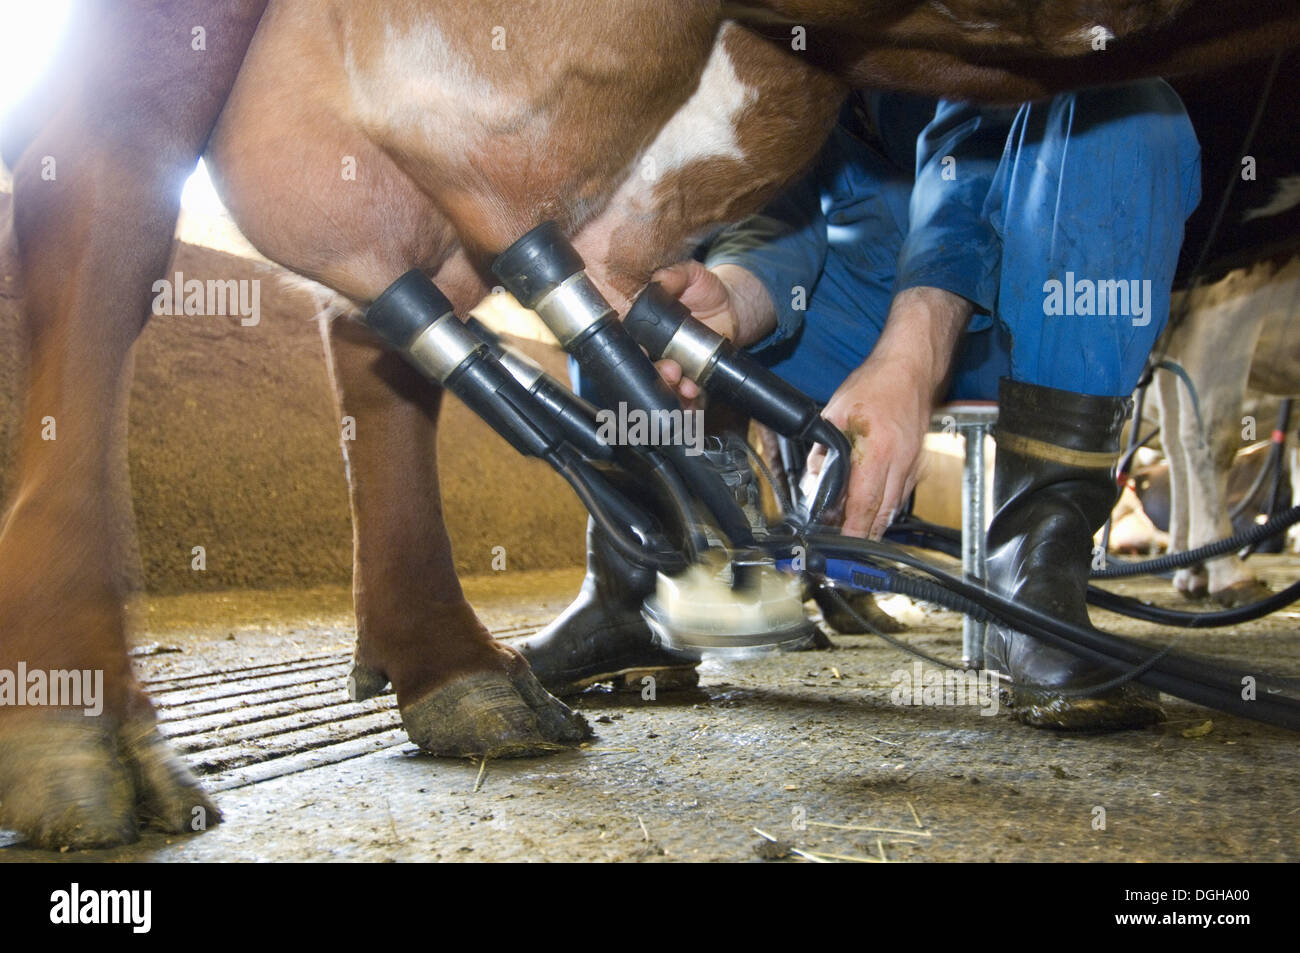 Dairy farmer attaching cluster unit to udder of dairy cow, in milking parlour, Sweden Stock Photo